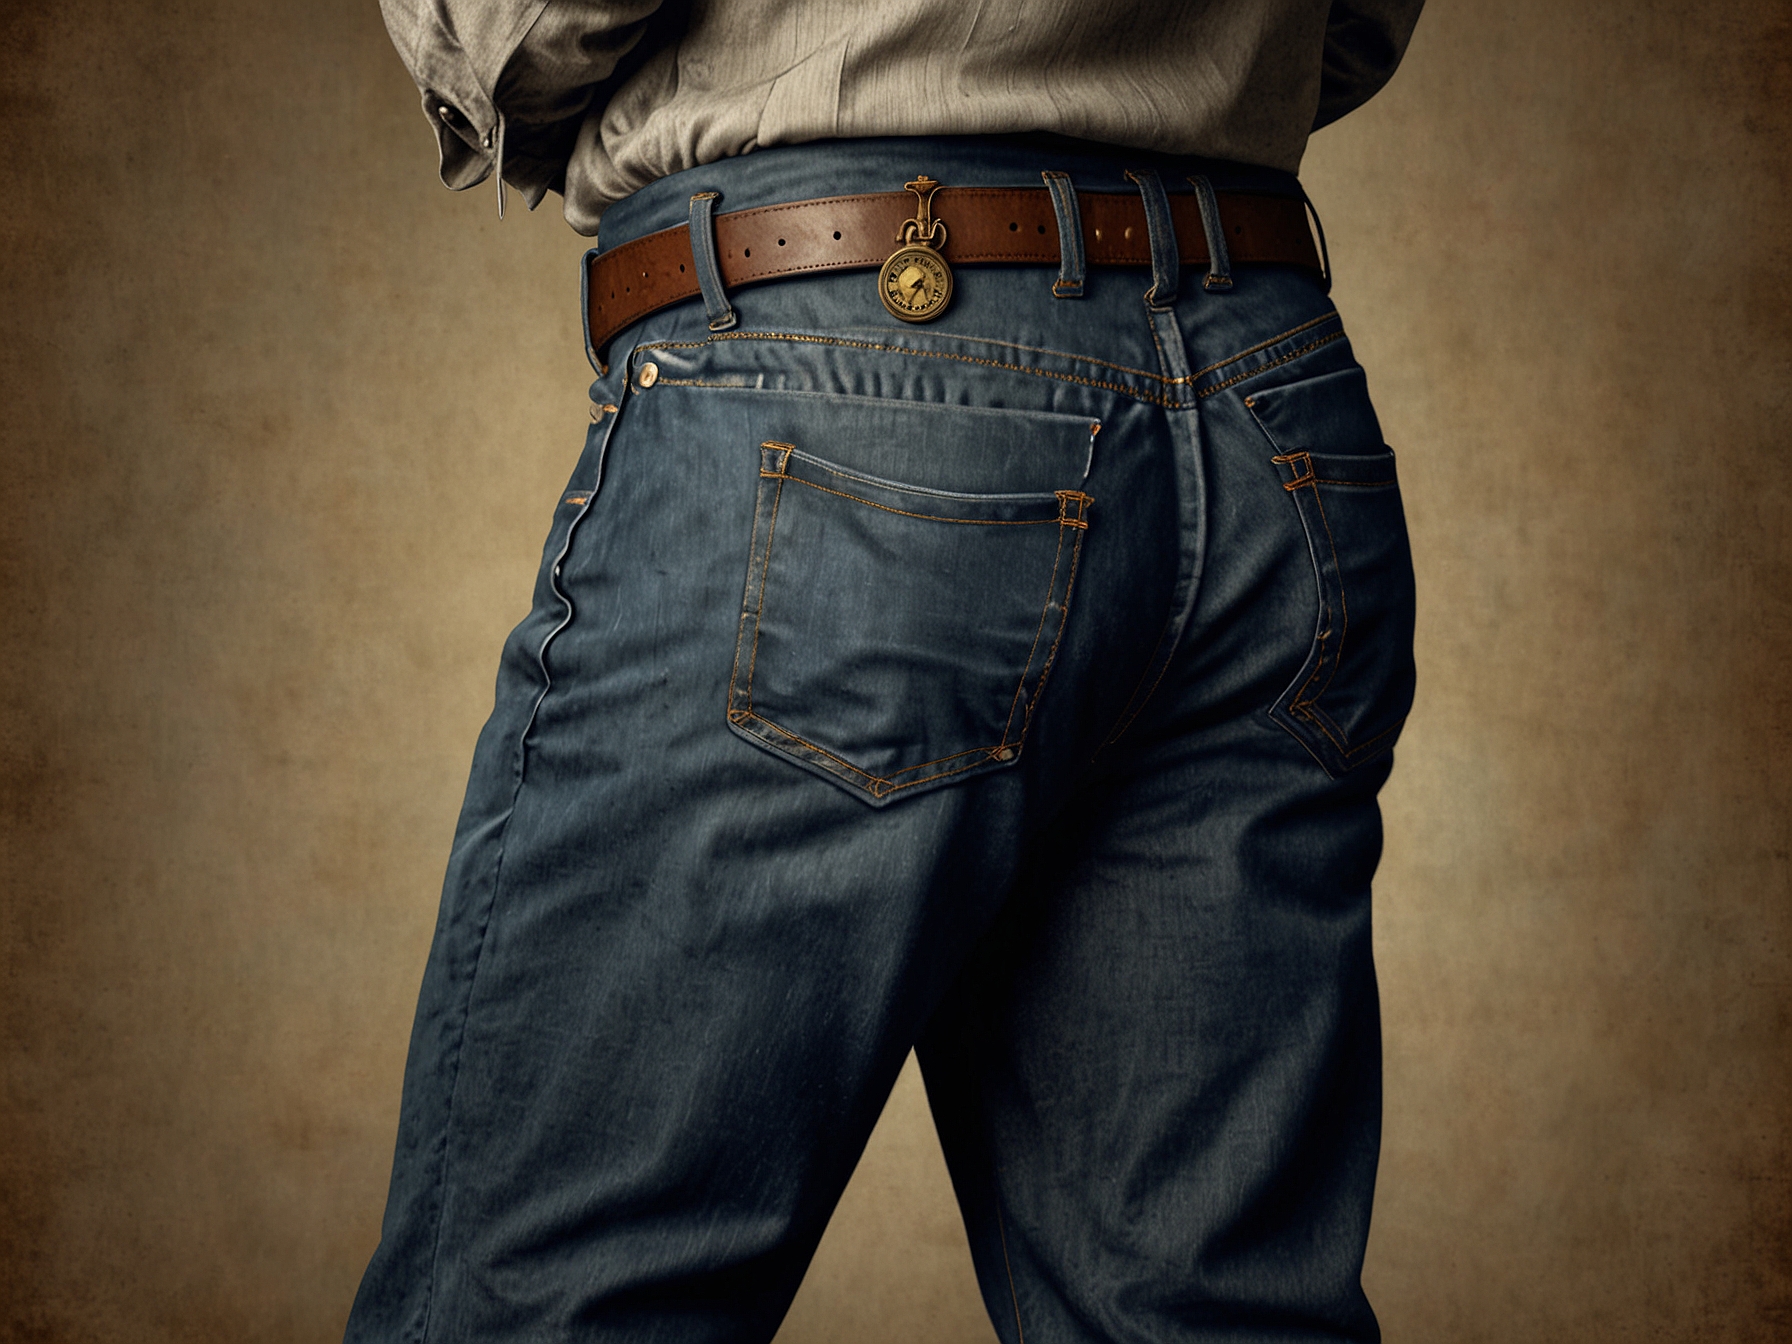 An 1870s-era man wearing early denim jeans with the newly introduced small pocket, showcasing its original purpose of securely holding a pocket watch.